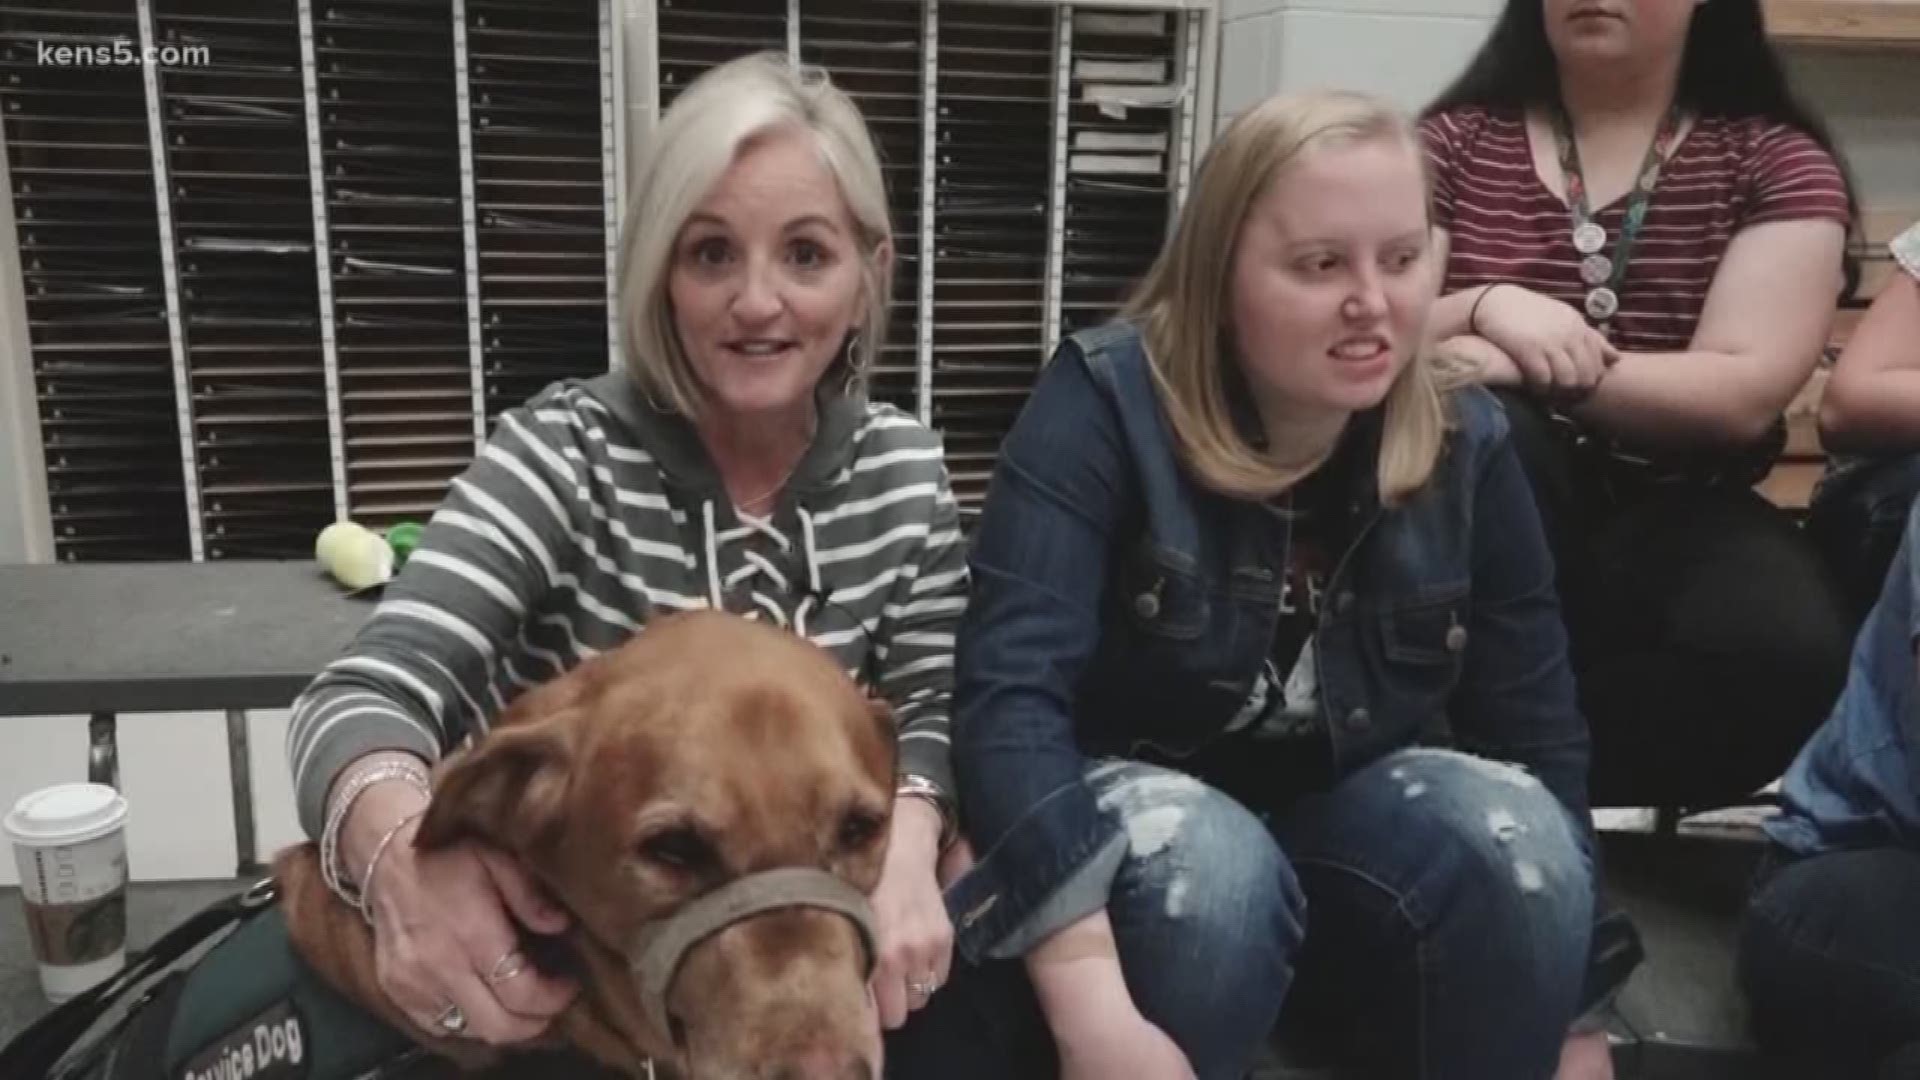 For 8 years high school junior Rachel Benke has had a service dog named Taxi by her side each day at school because she's had epileptic seizures since birth.